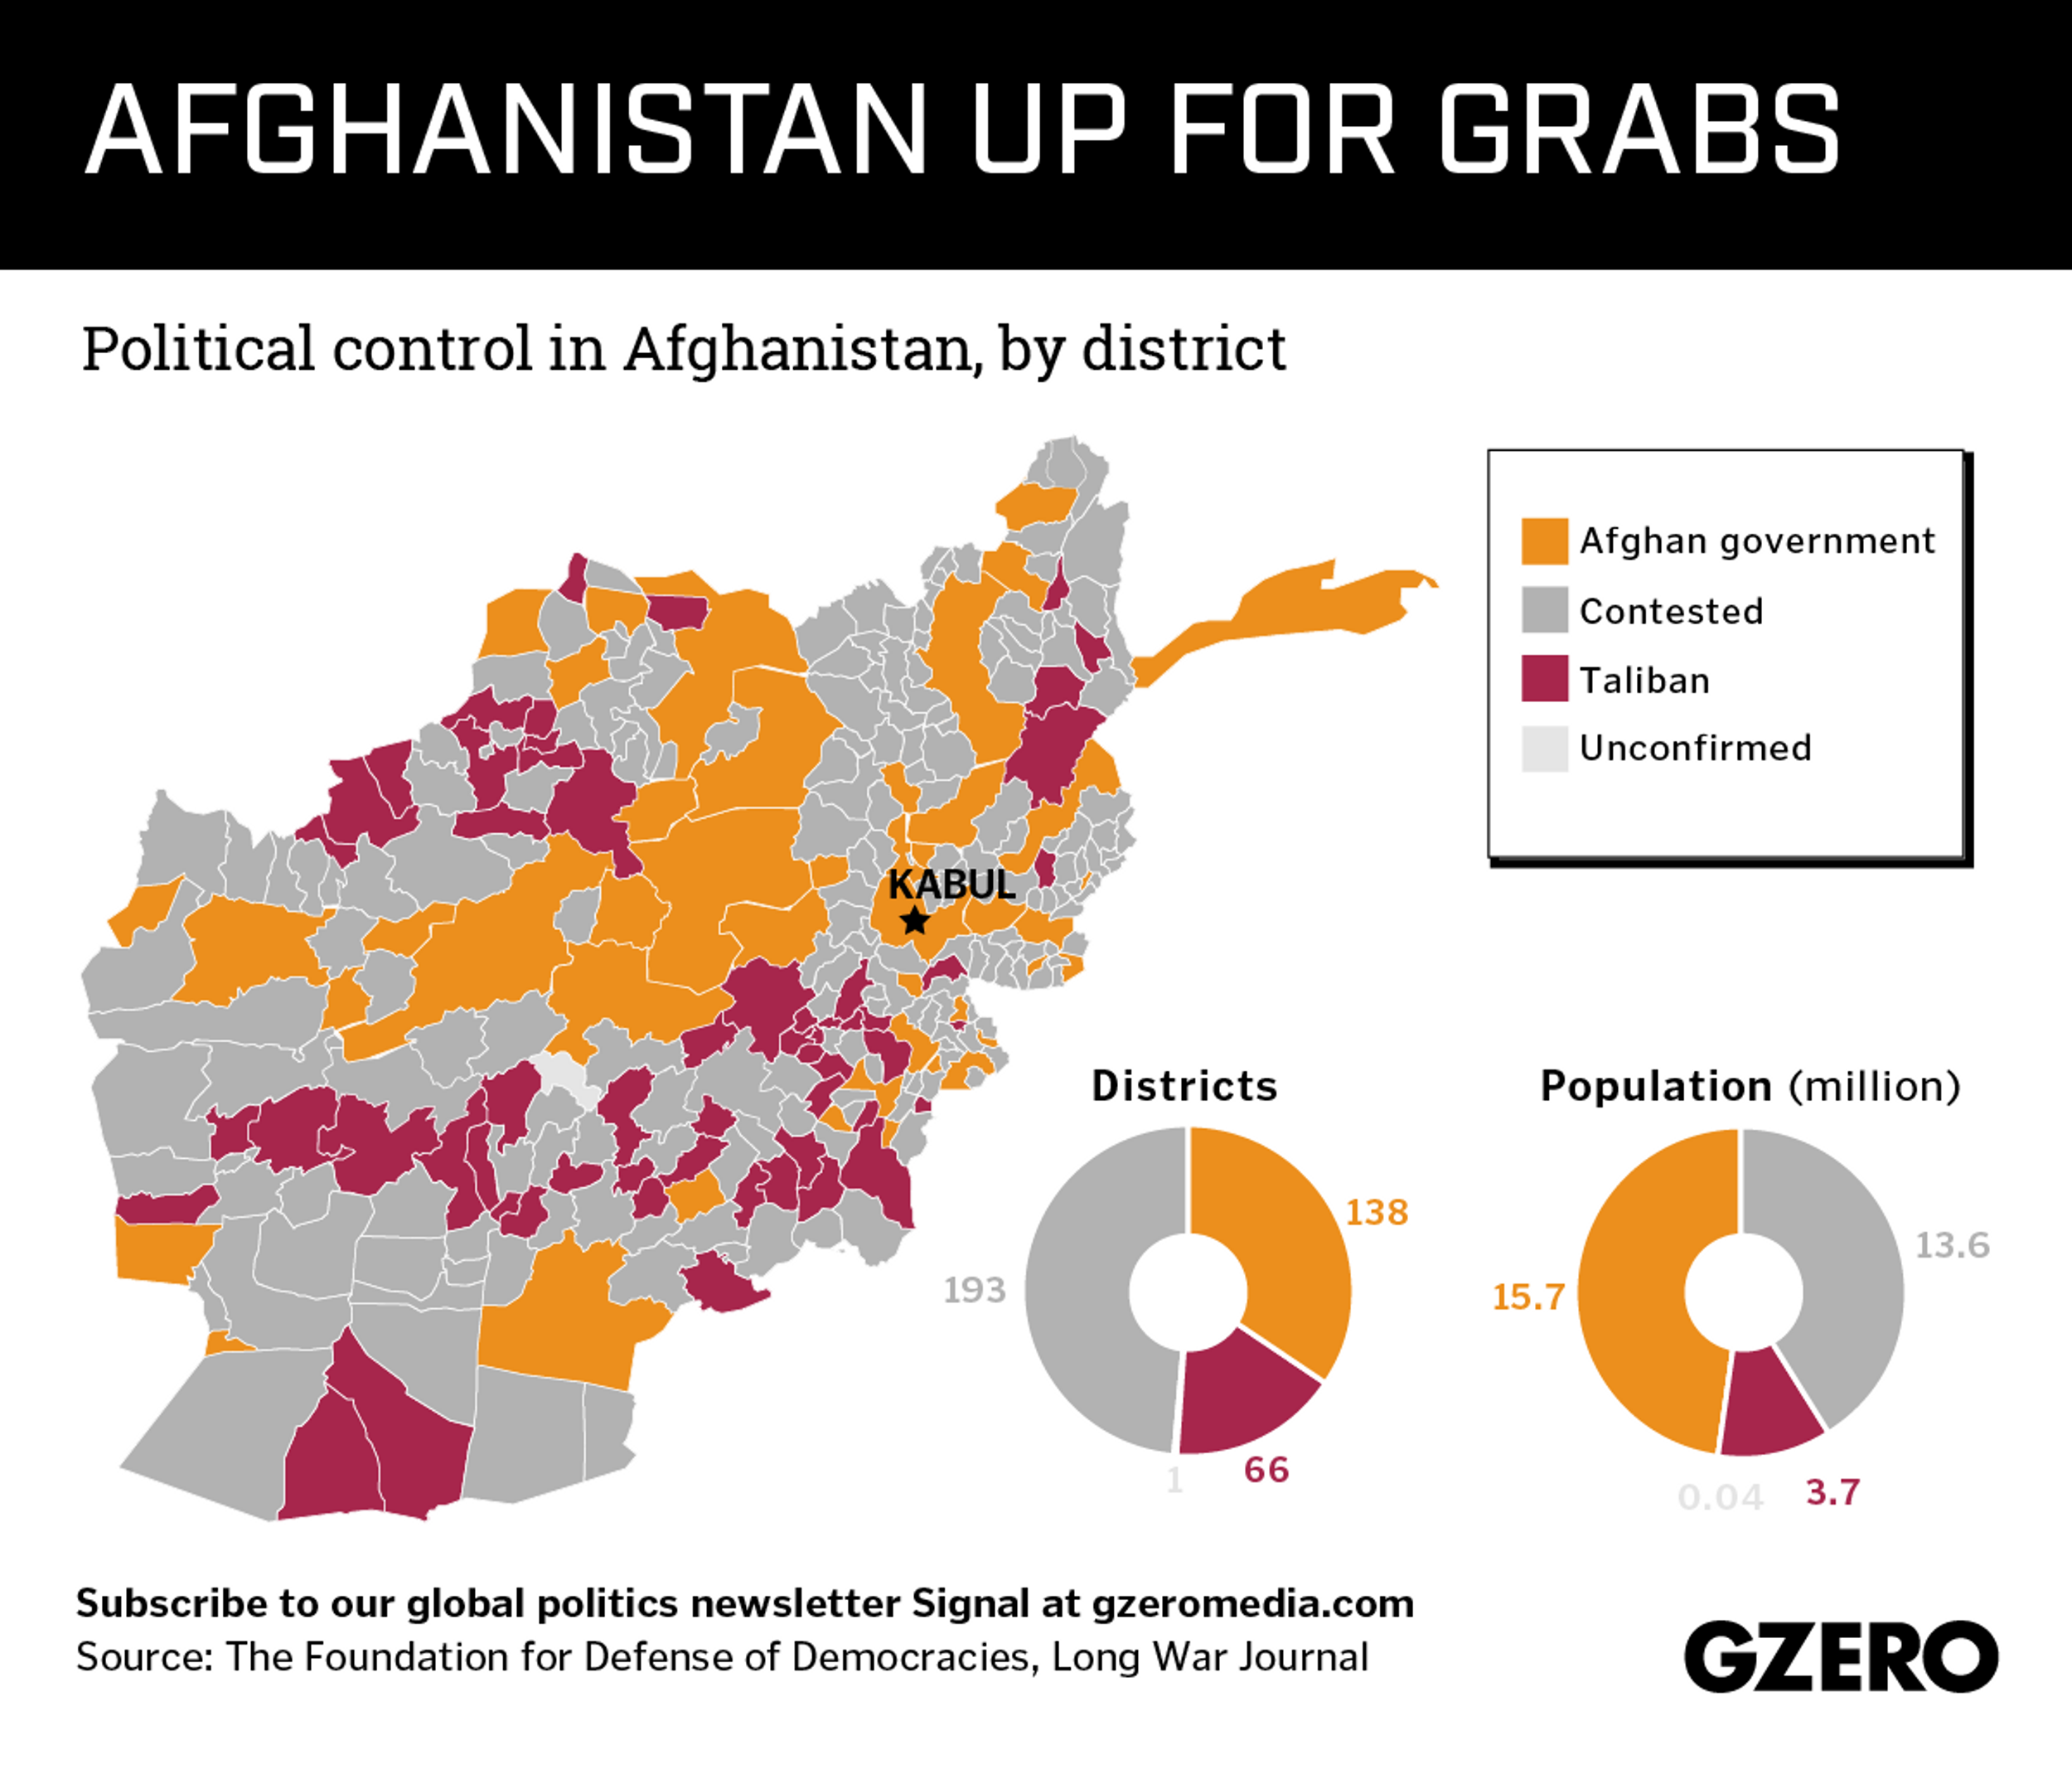 Graphic Truth: Afghanistan Up For Grabs